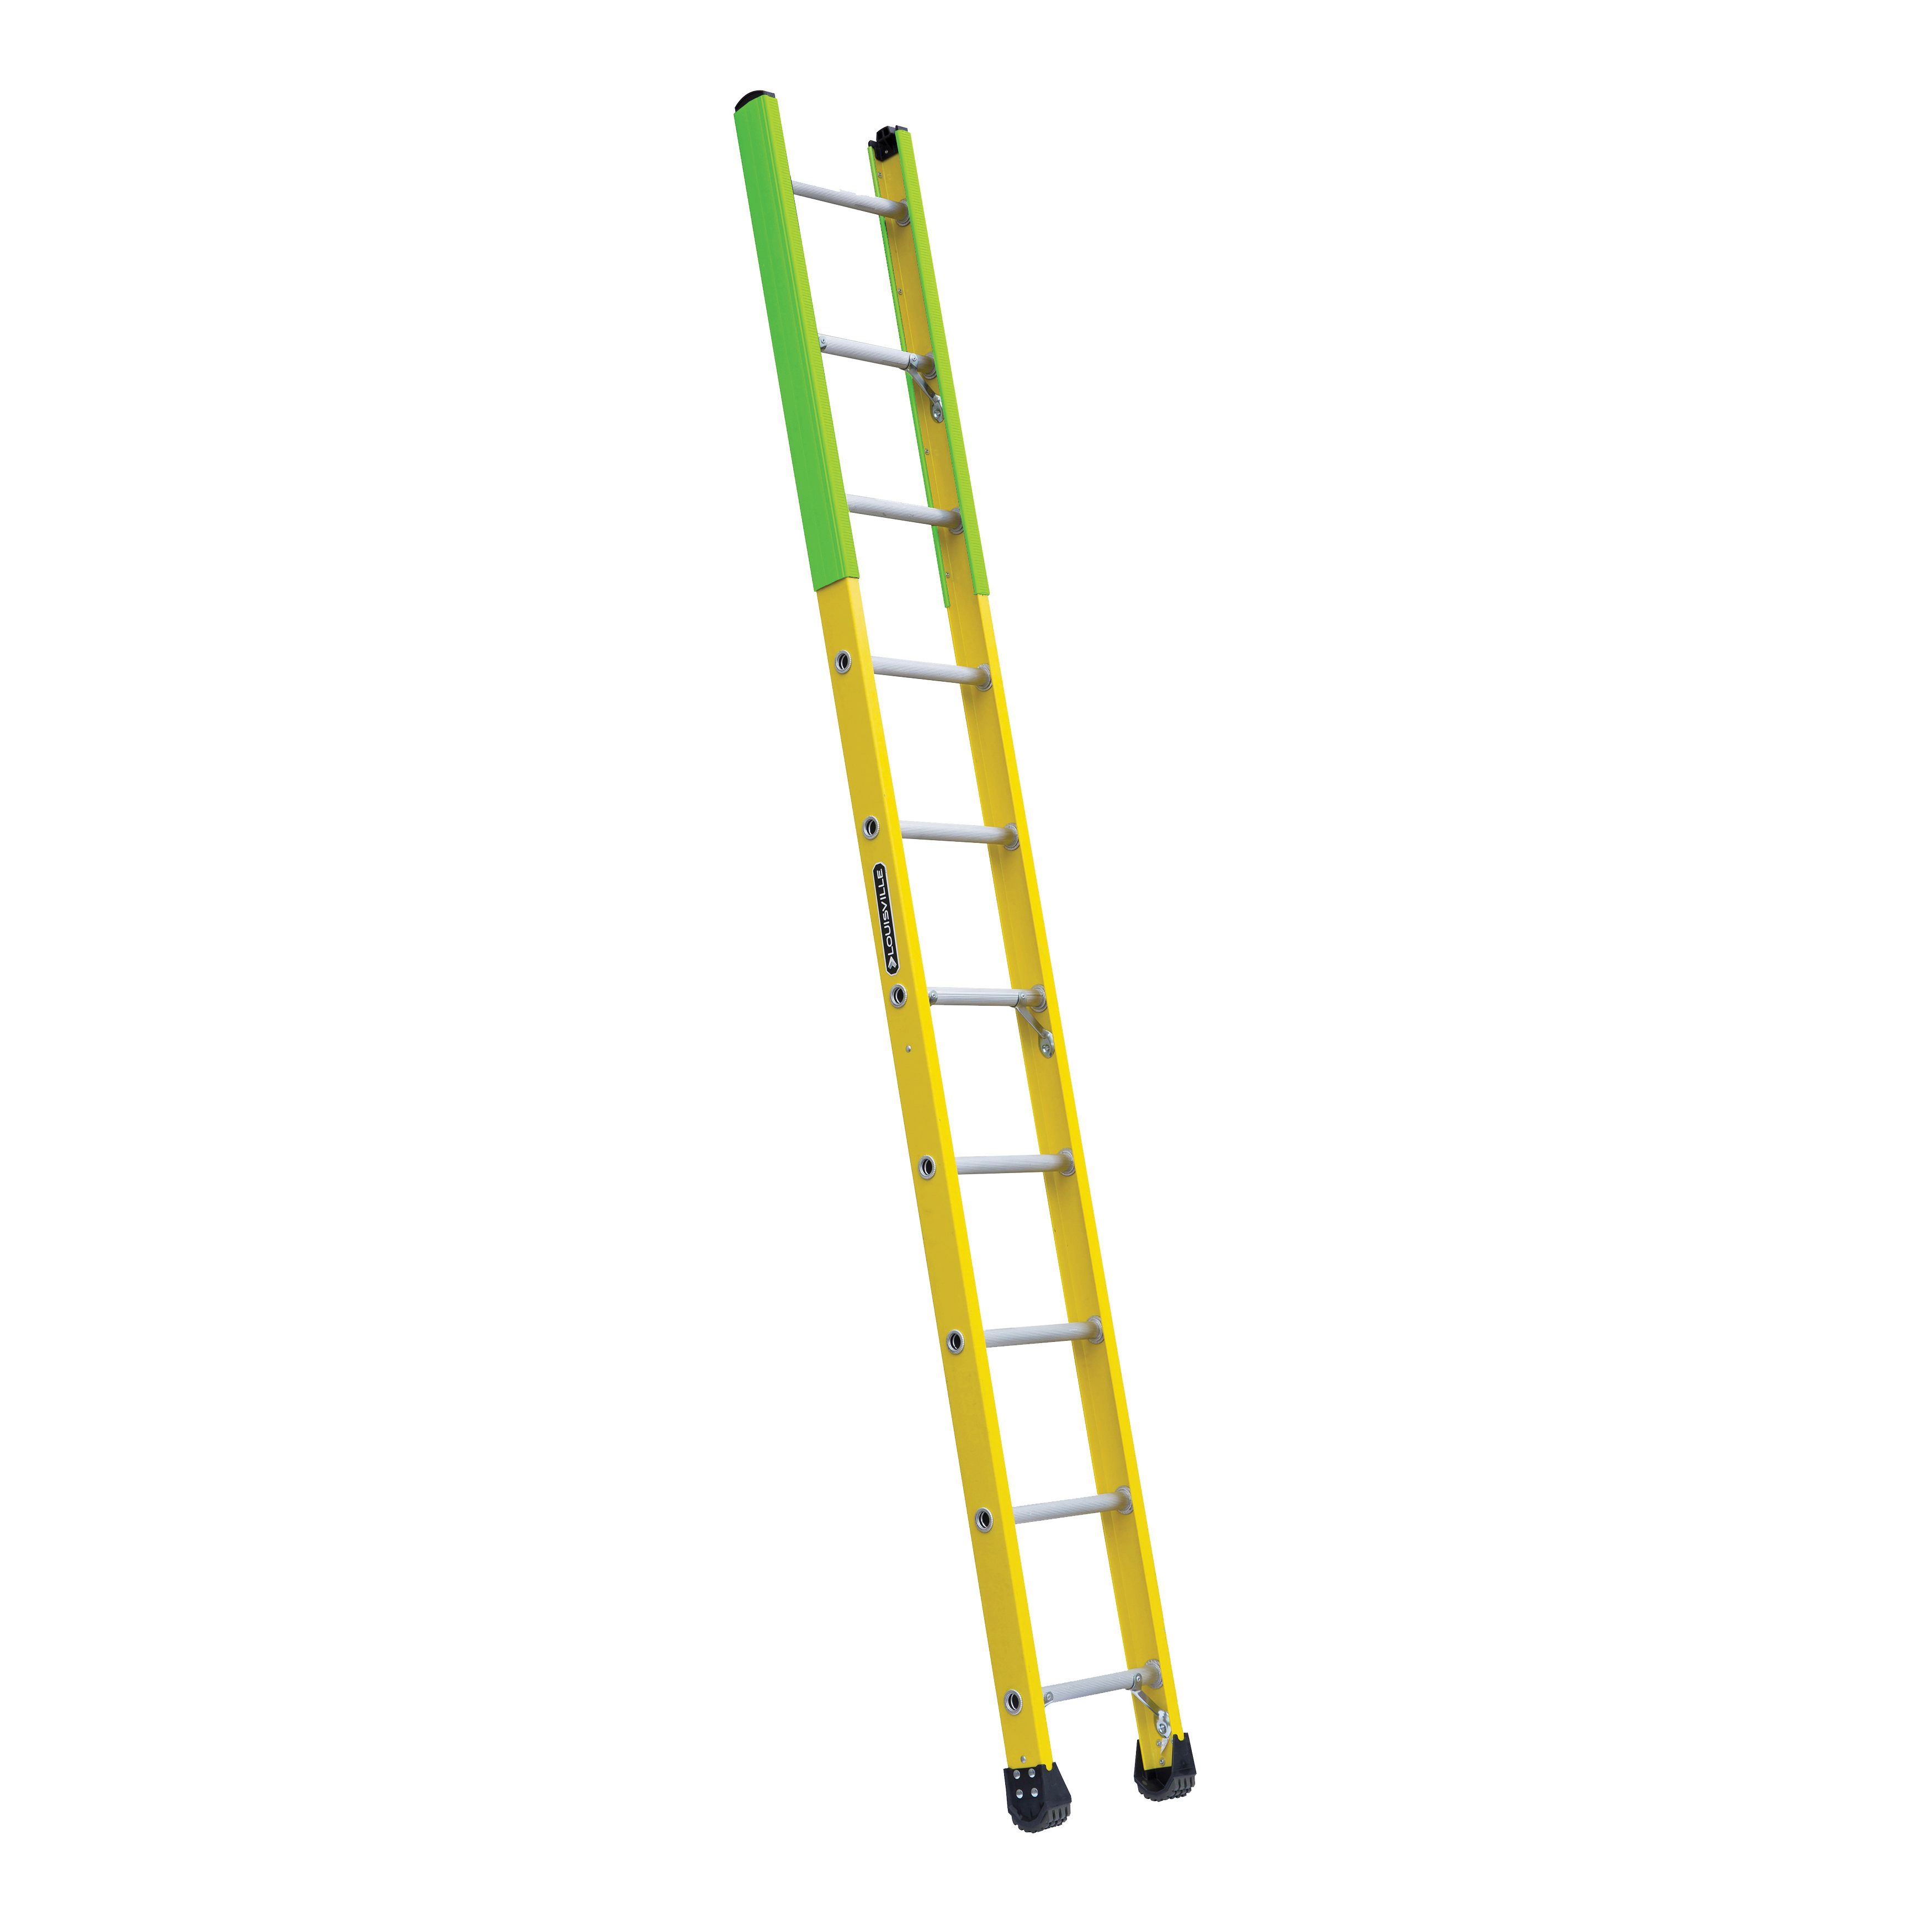 Louisville® FE8910 Manhole Extension Ladder, 10 ft H x 14-1/2 in W, 375 lb Load, Fiberglass, 9 ft 6 in H Top Step redirect to product page